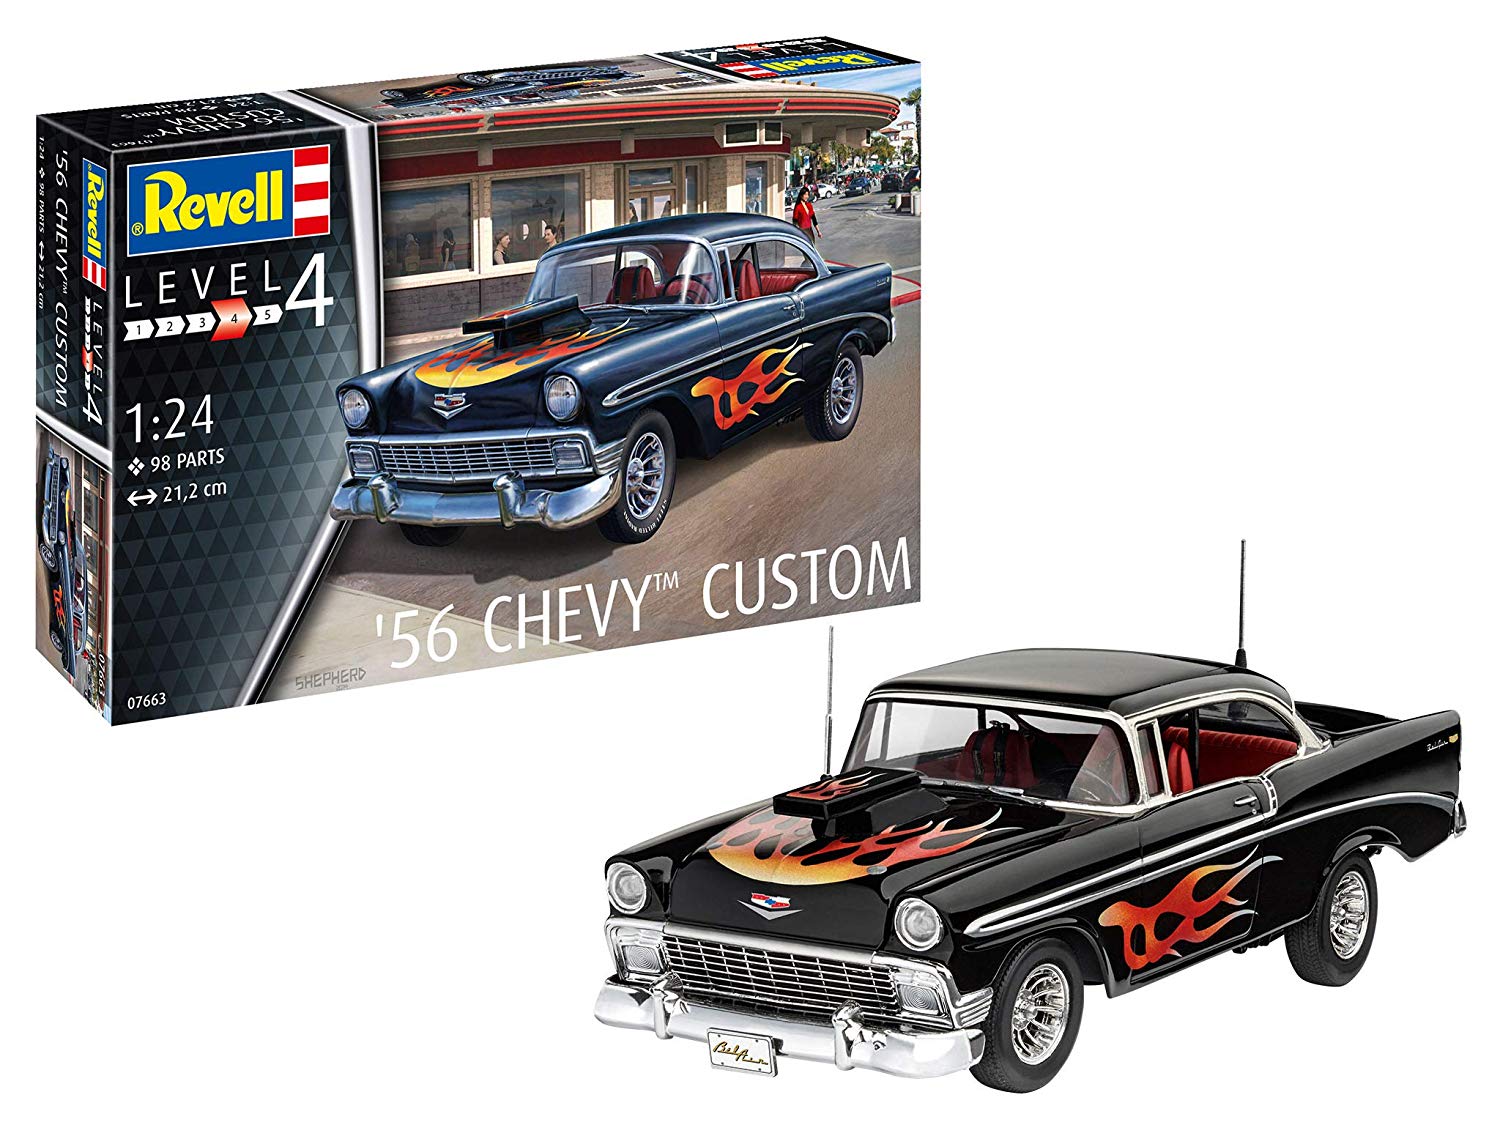 Revell 67663 Model Set 56 Chevy Customs Accurate Advanced Model Kit With B